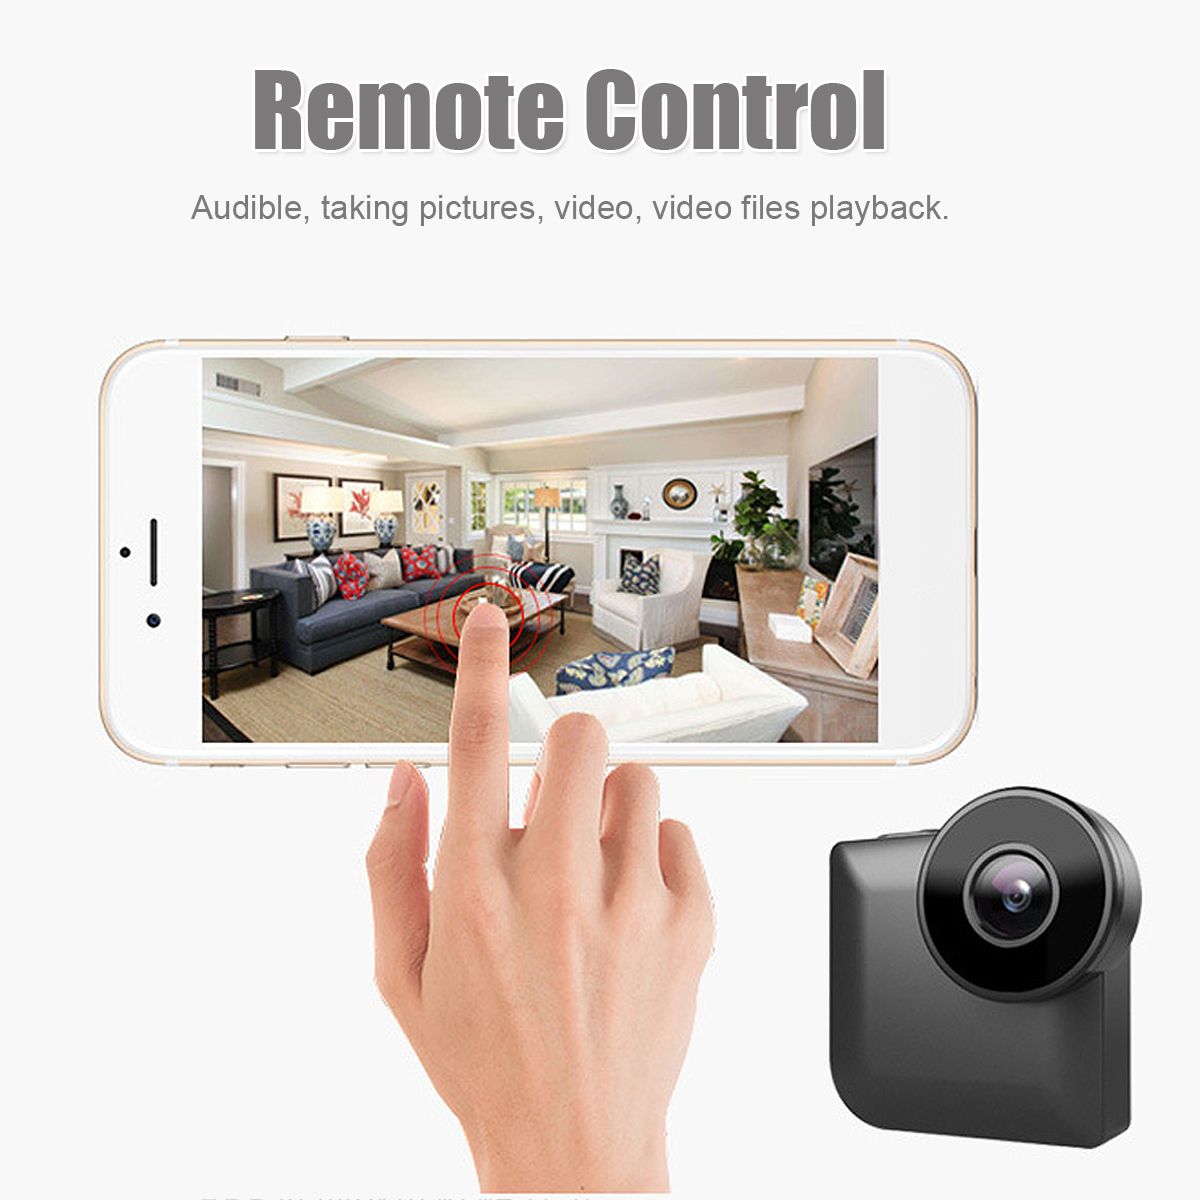 WiFi-140deg-Wide-angle-720P-Camera-Motion-Detection-Remote-Intelligent-Infrared-IP-Wireless-HD-Camer-1330041